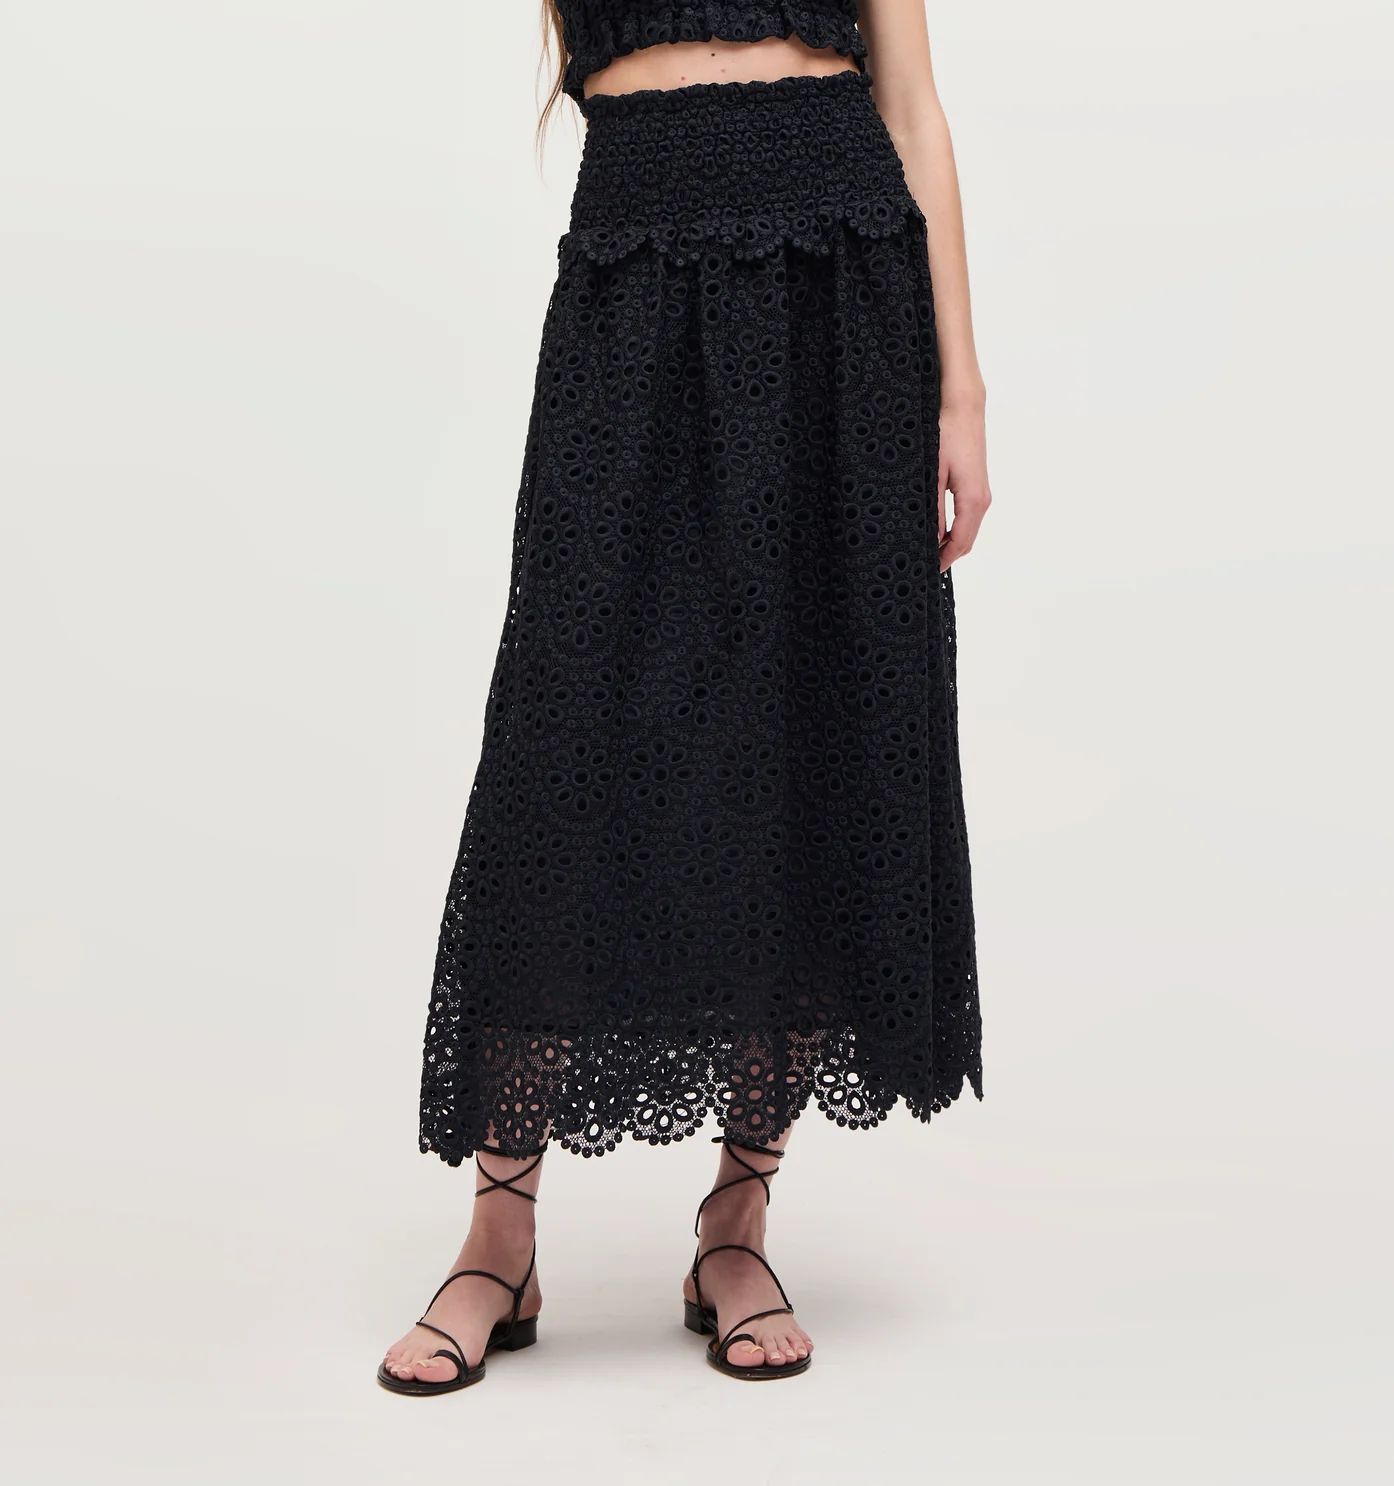 The Scallop Lace Delphine Nap Skirt | Hill House Home